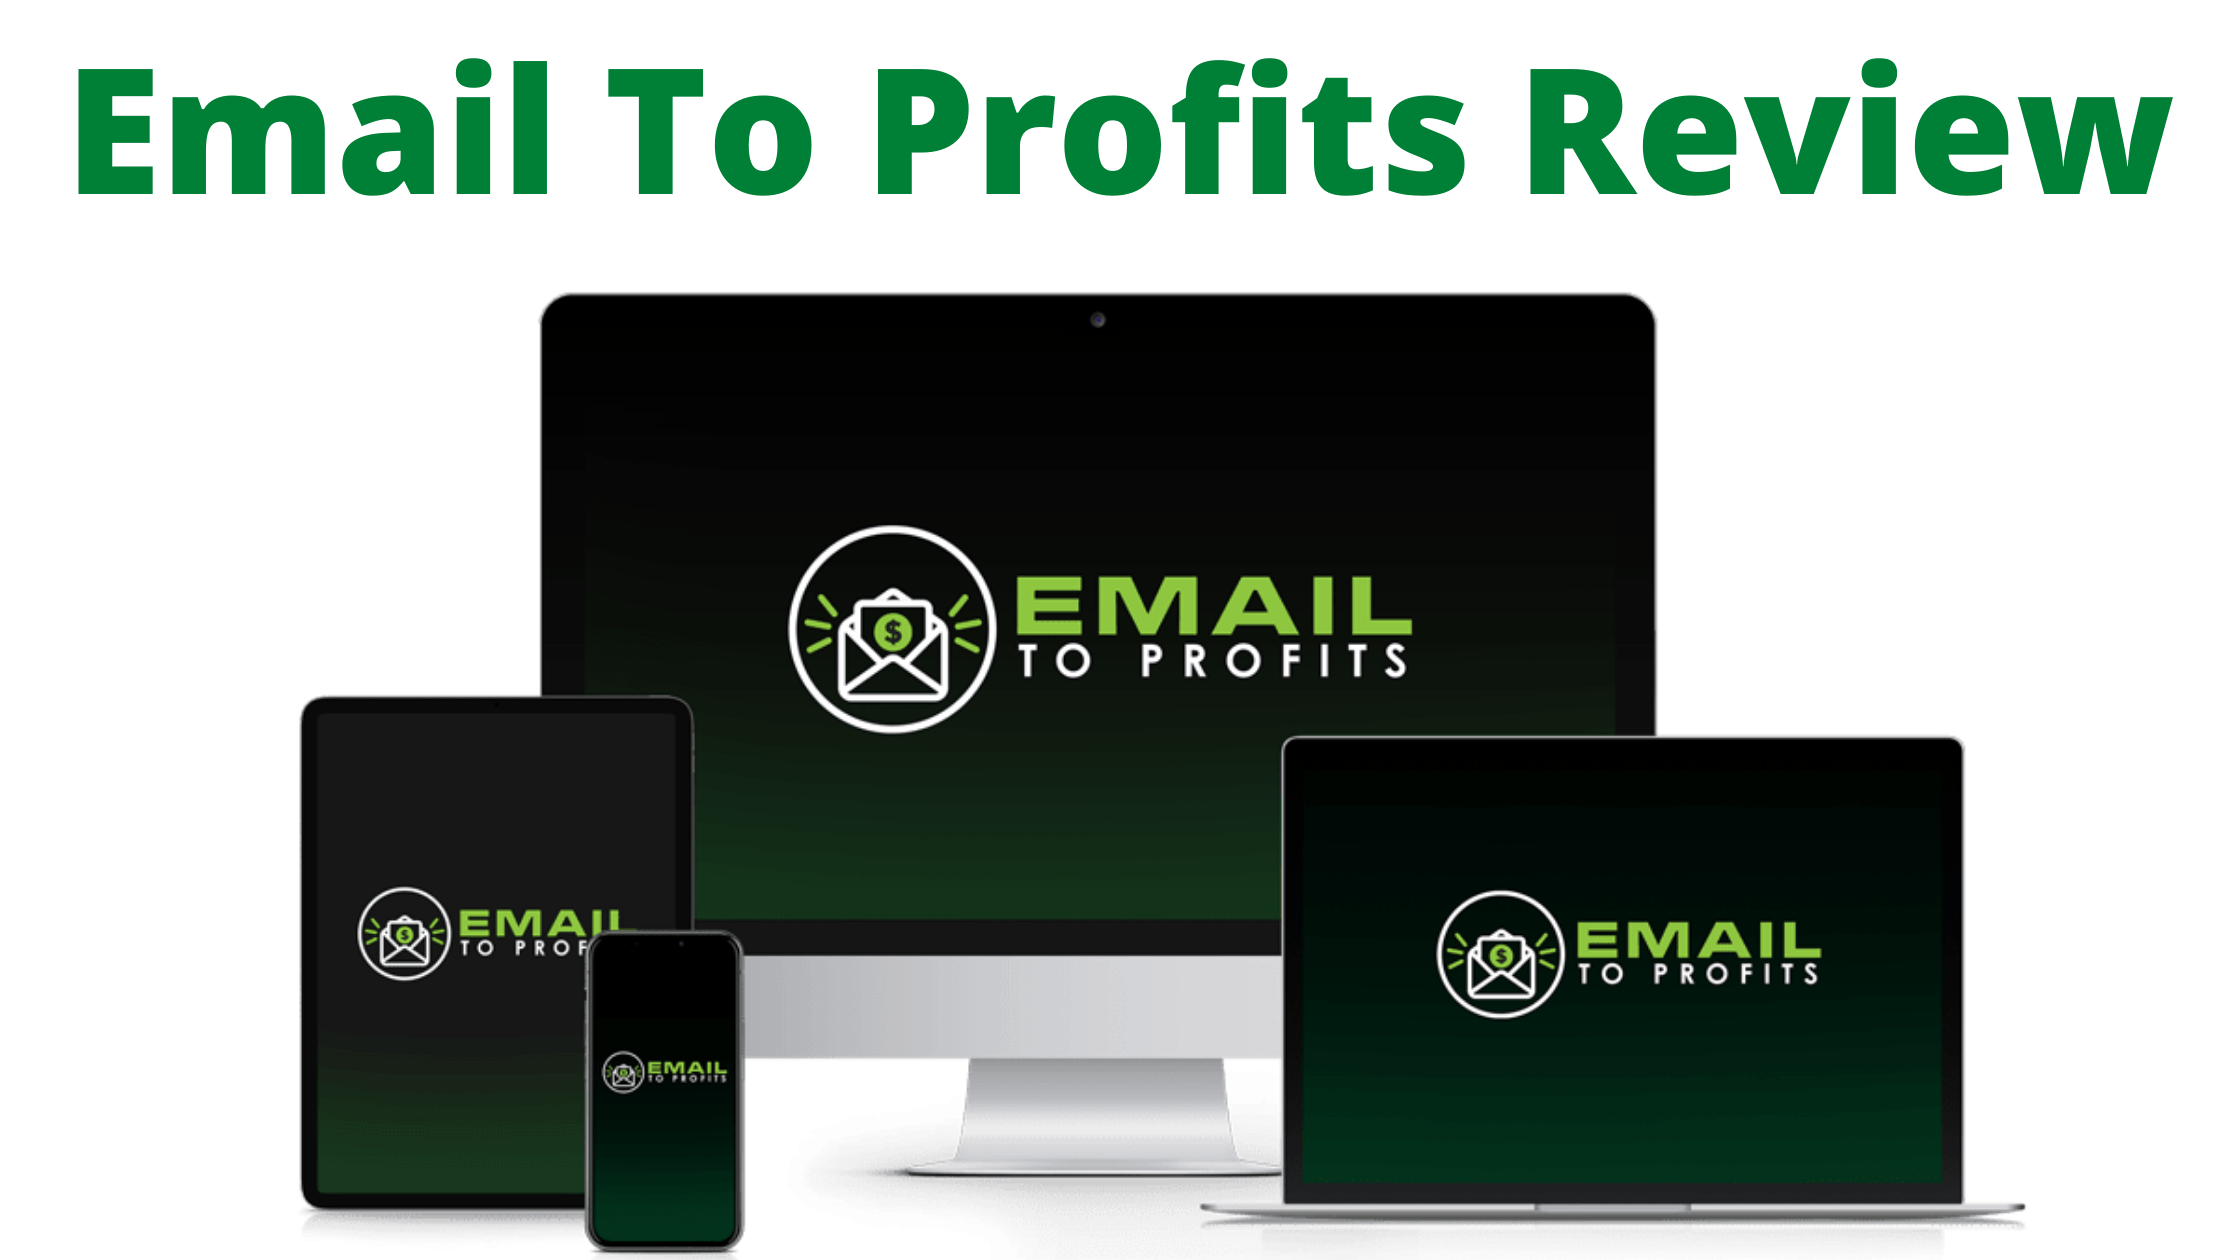 Email To Profits Review